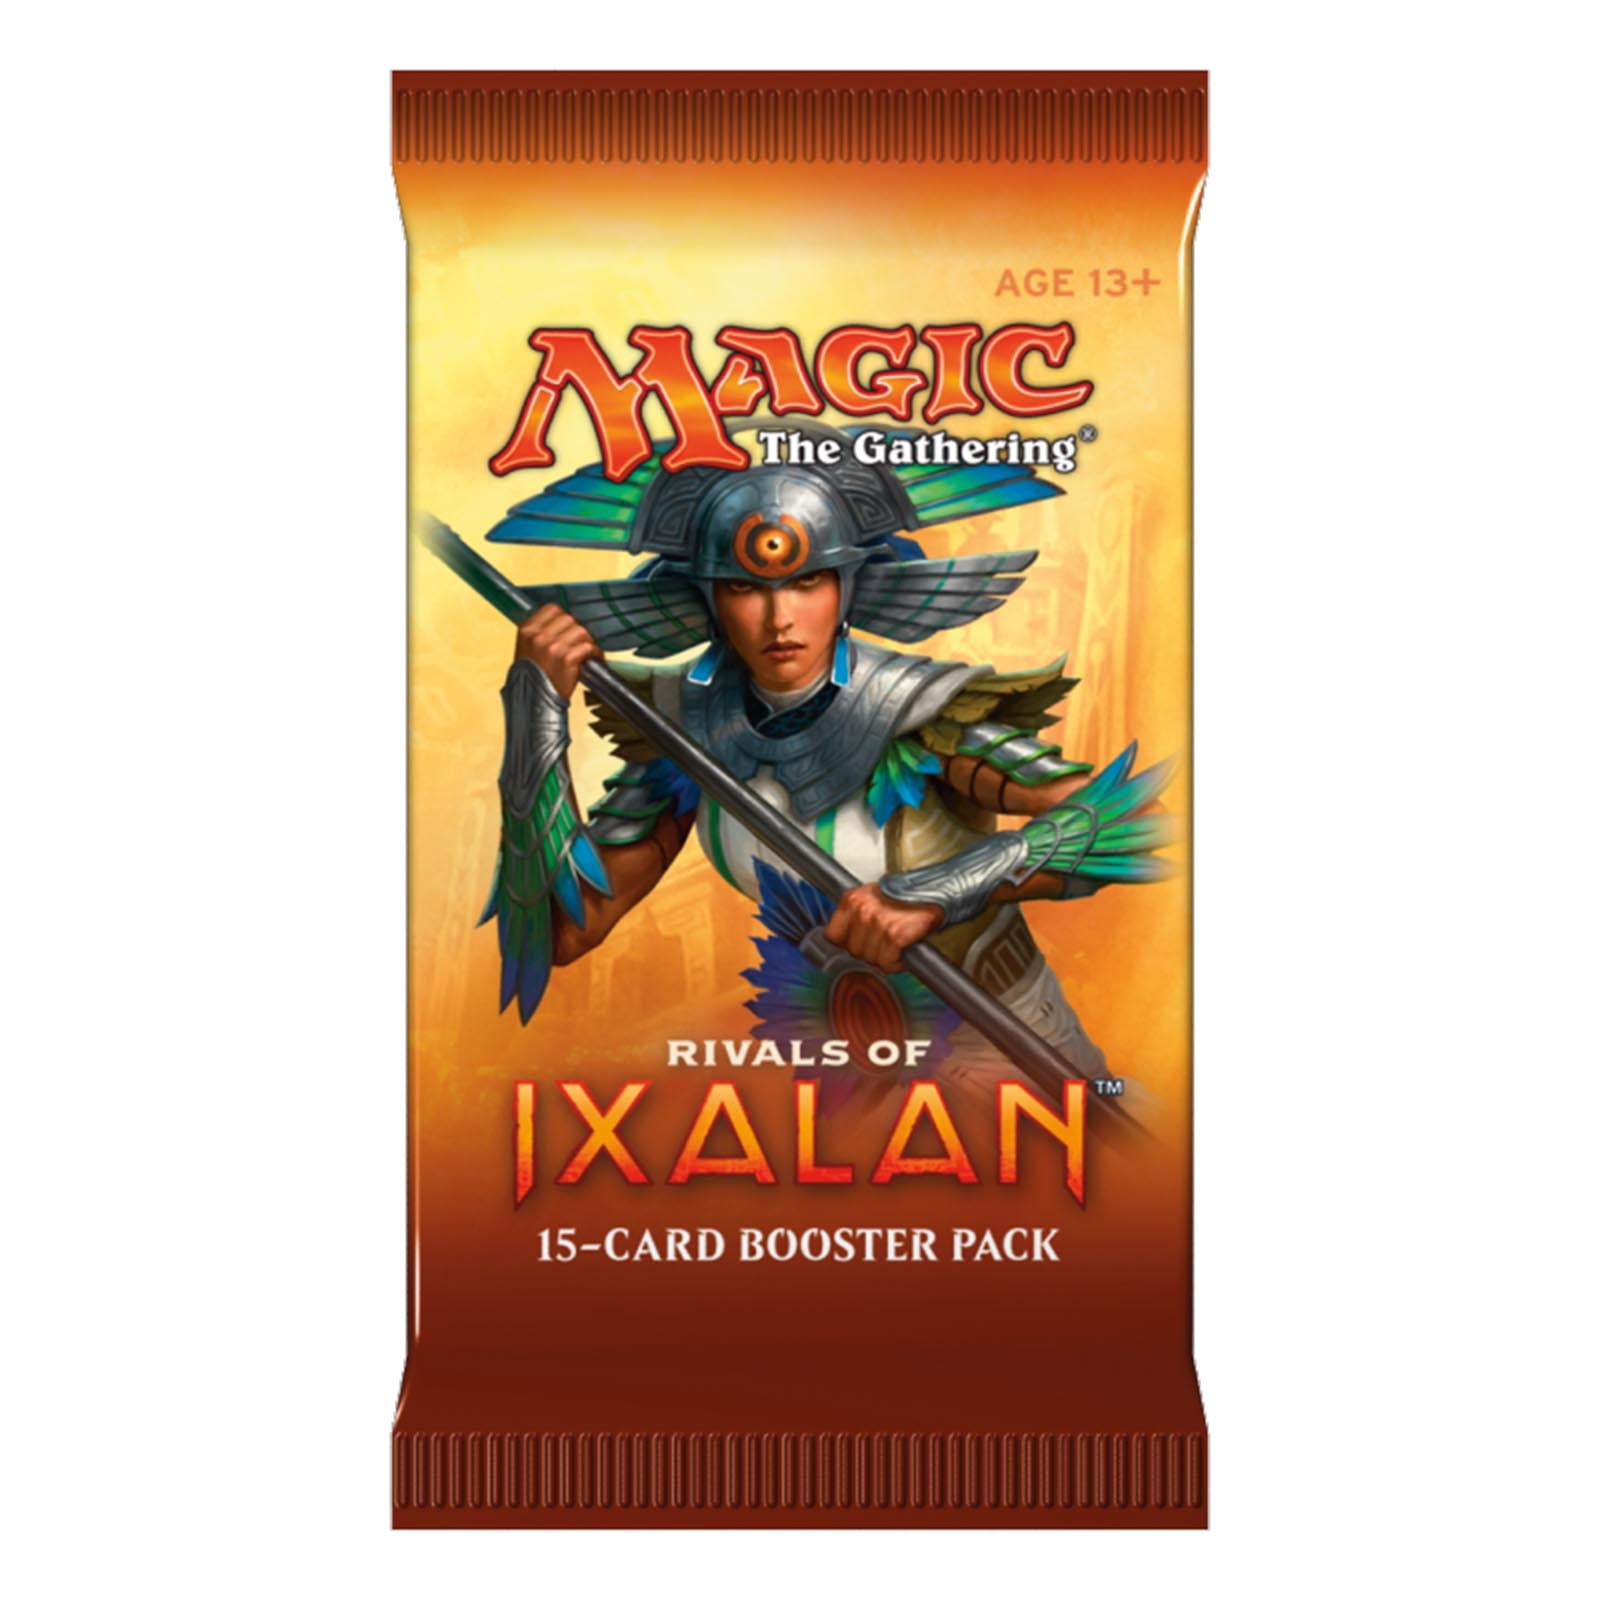 FACTORY SEALED BRAND NEW MAGIC Rivals of Ixalan Booster Pack ENGLISH 